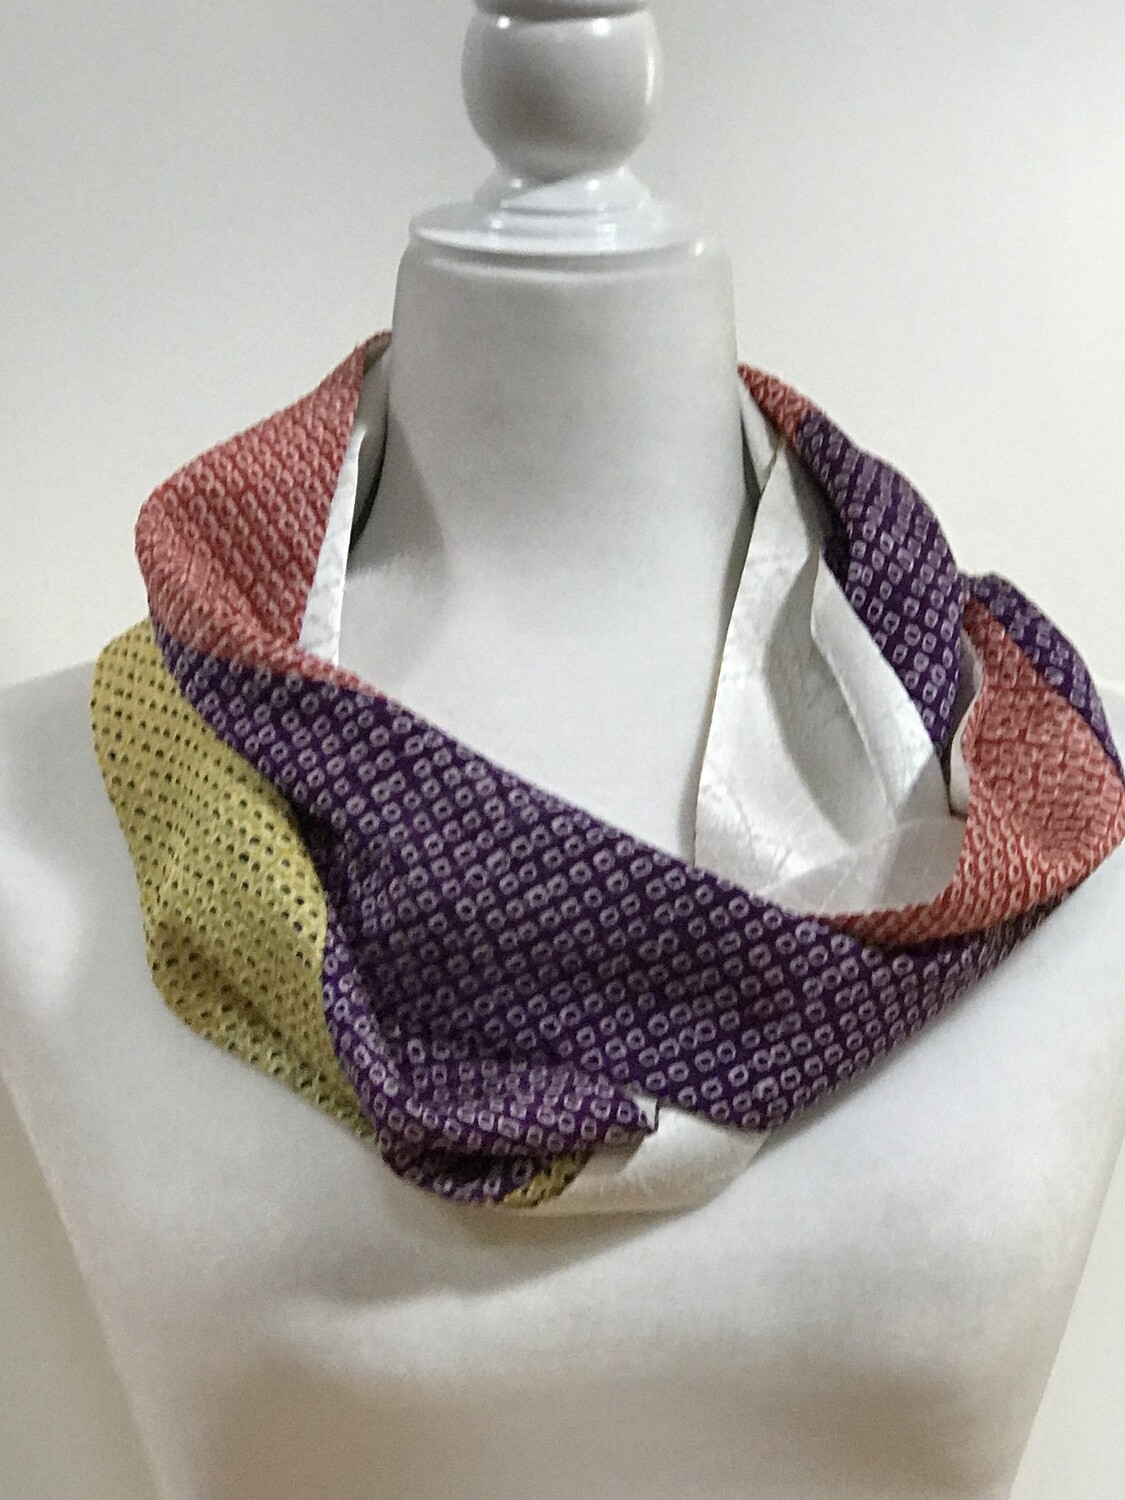 Double infinity scarf
6 1/4 x 62in